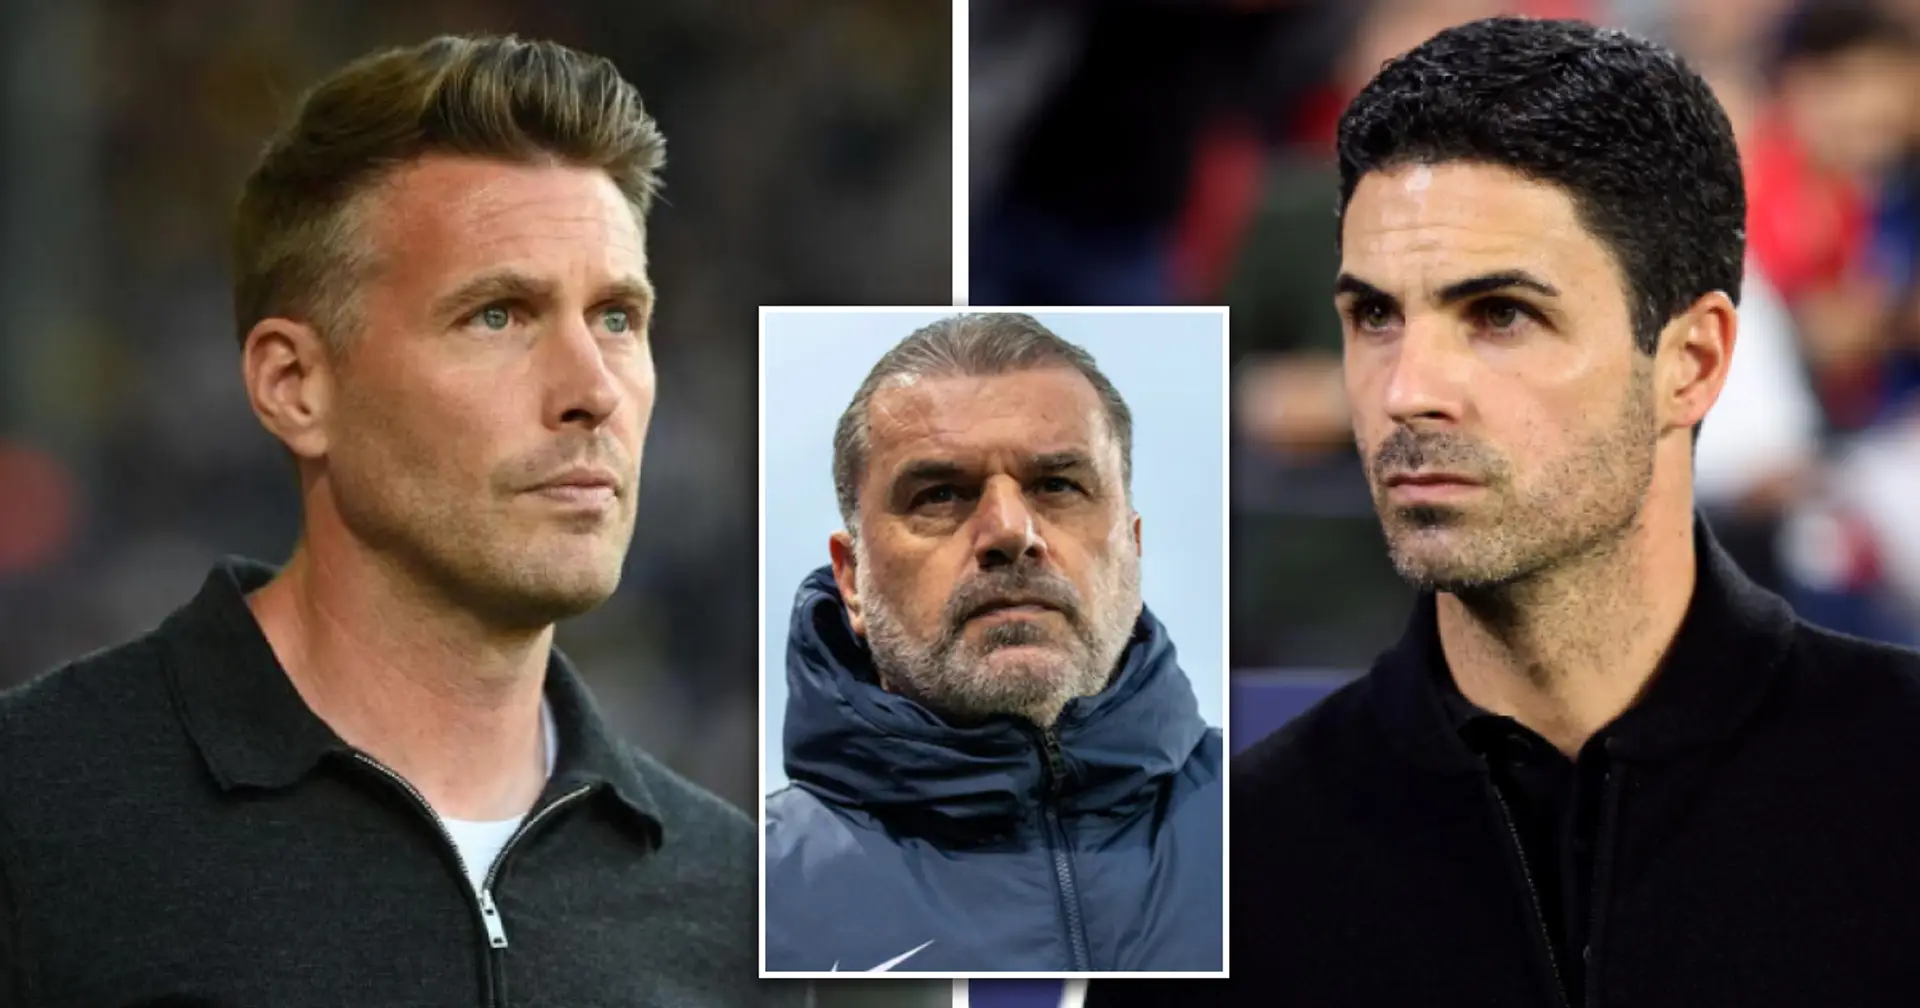 AI reveals Premier League's most handsome manager - two are higher than 8/10 